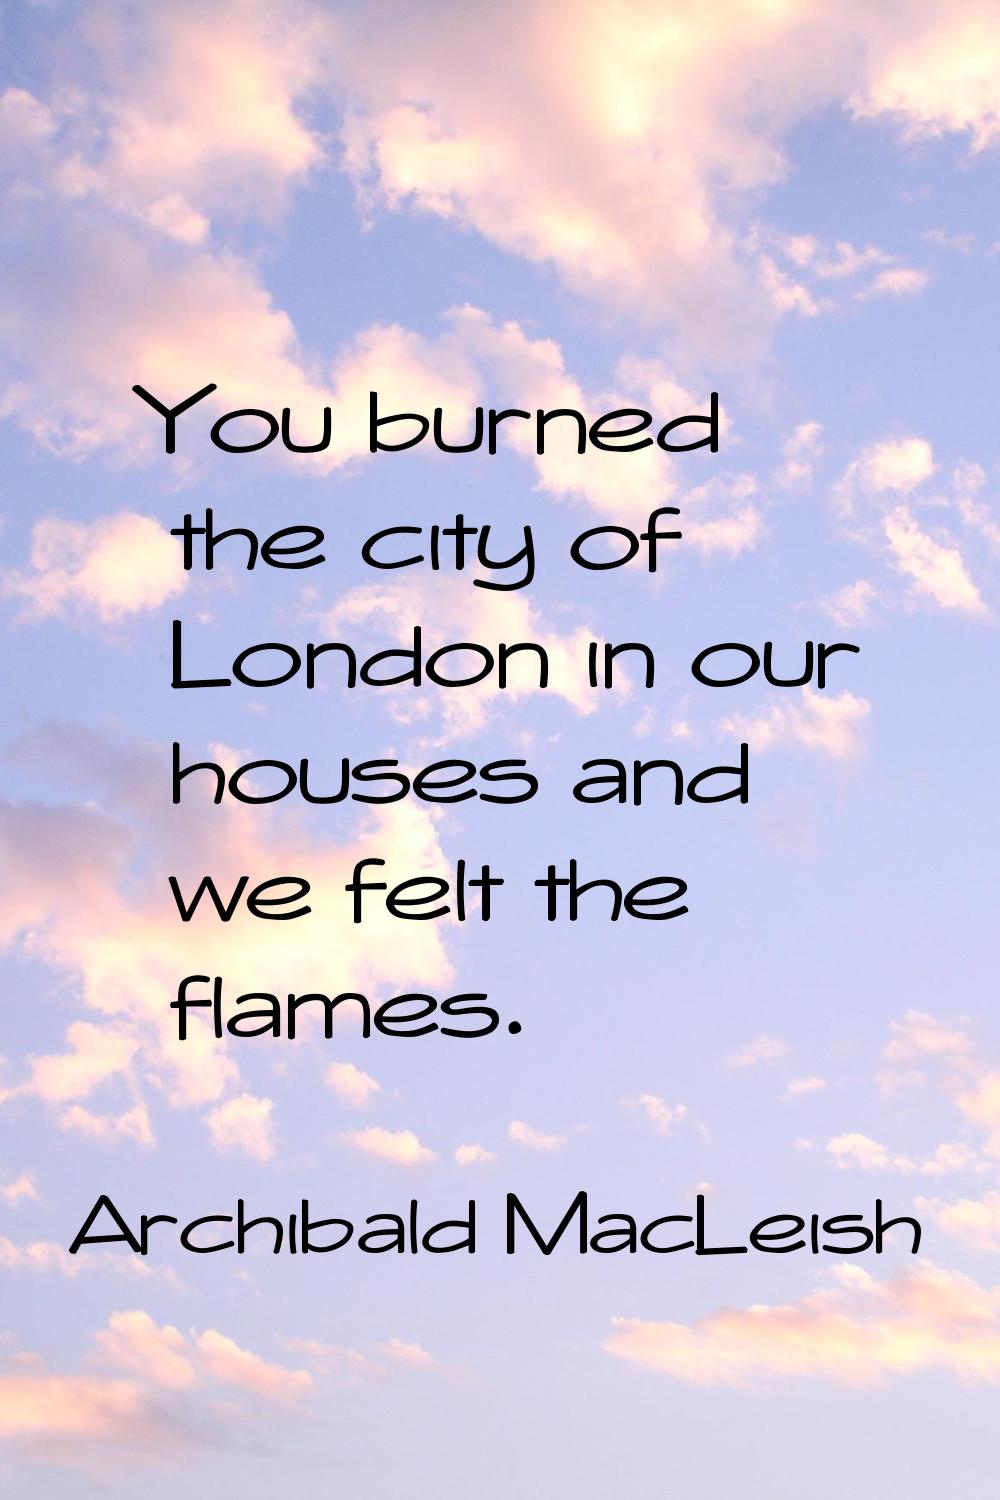 You burned the city of London in our houses and we felt the flames.